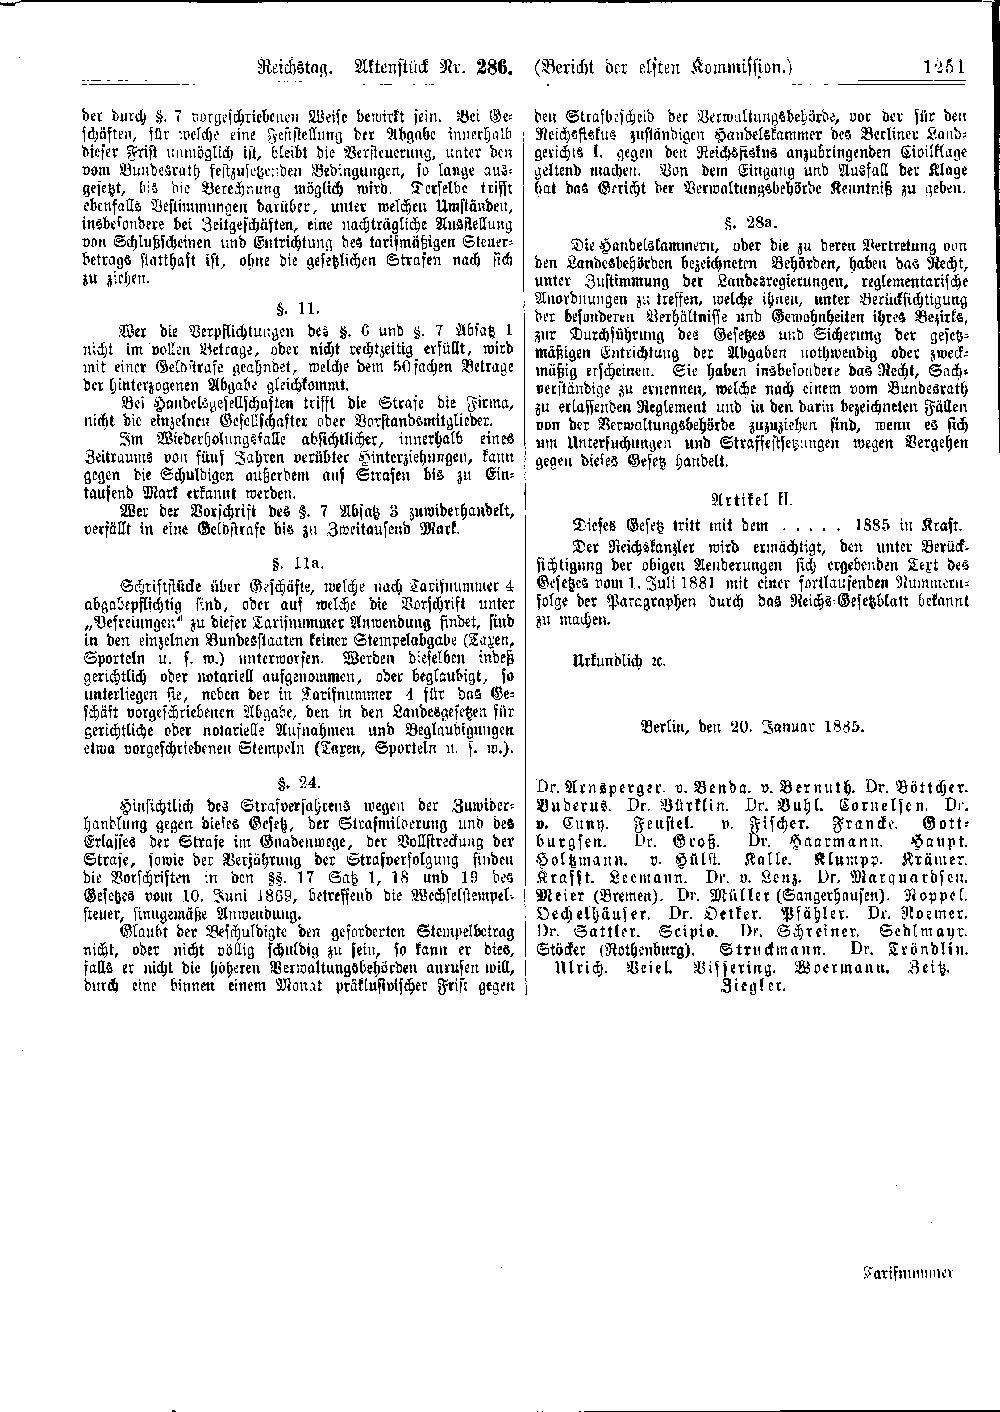 Scan of page 1251